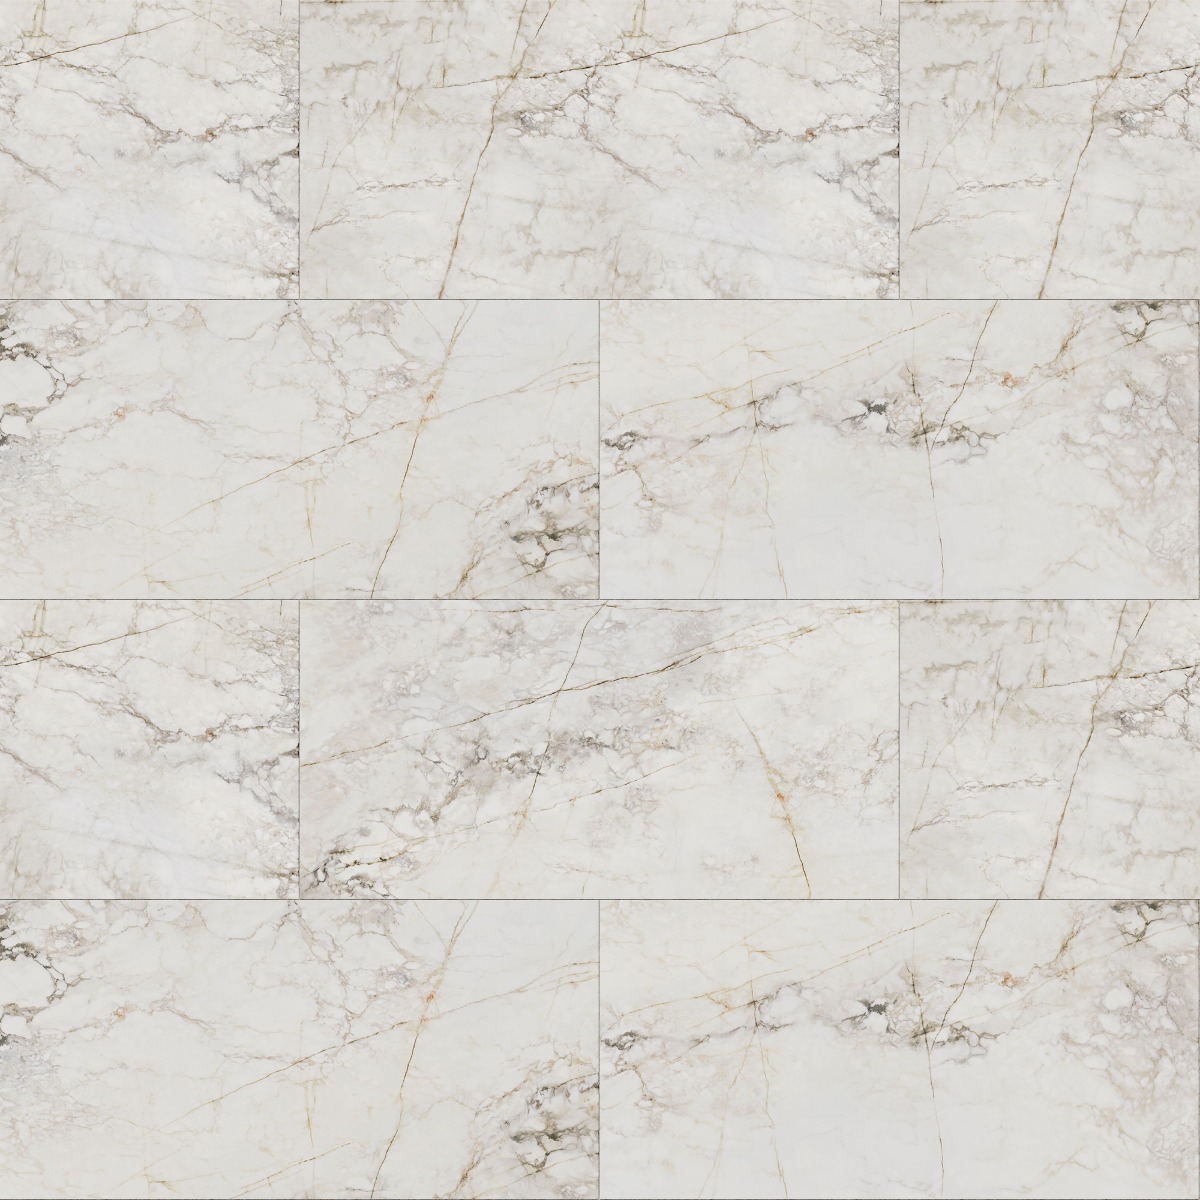 A seamless tile texture with balance stone pol porcelain tile tiles arranged in a Stretcher pattern